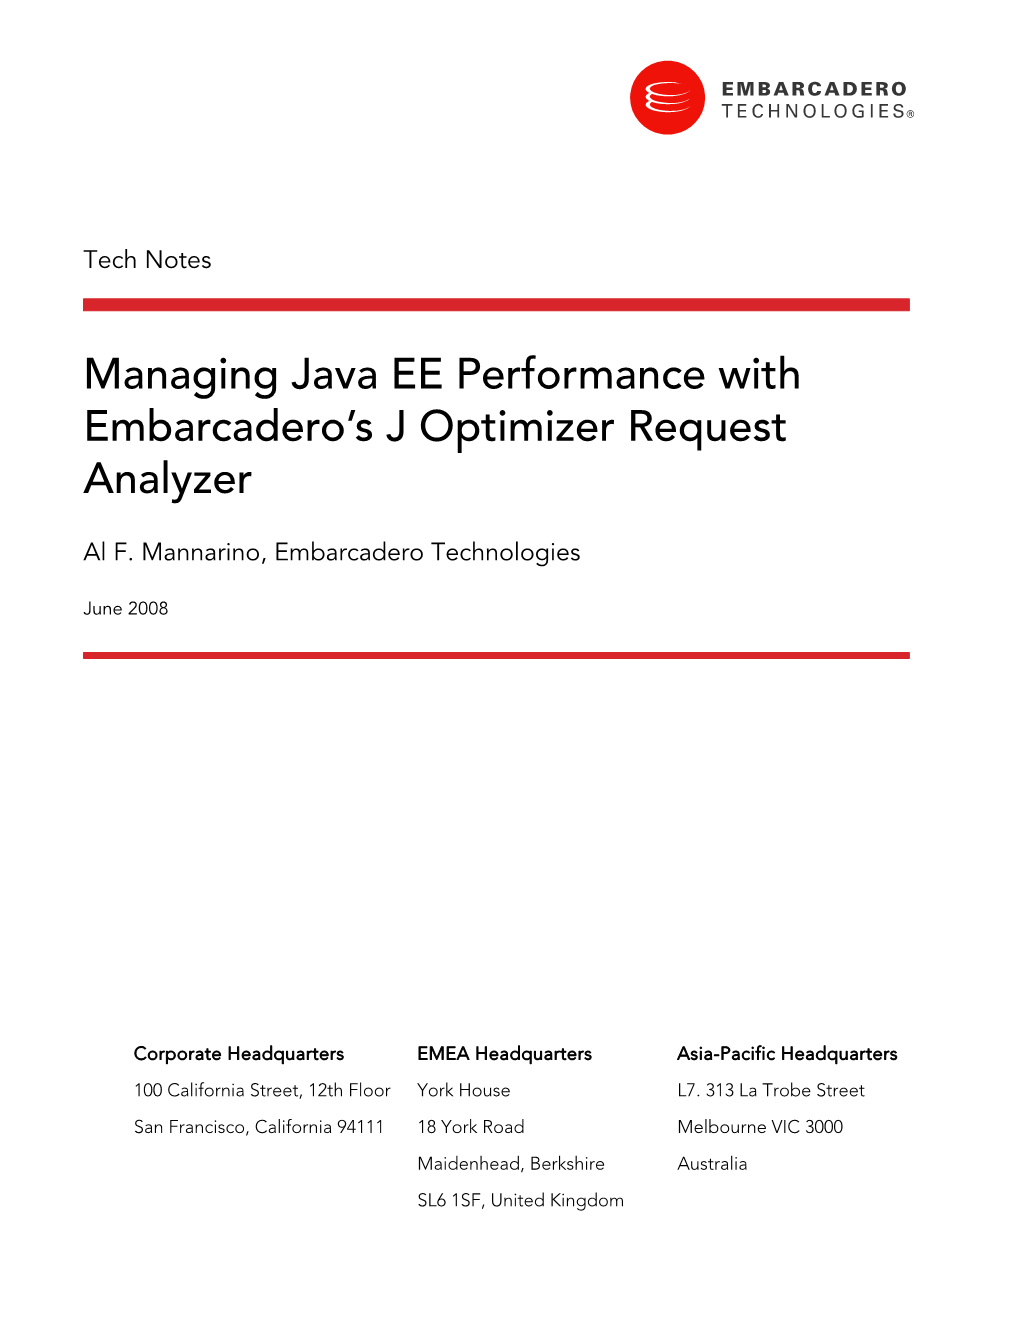 Managing Java EE Performance with Embarcadero's J Optimizer Request